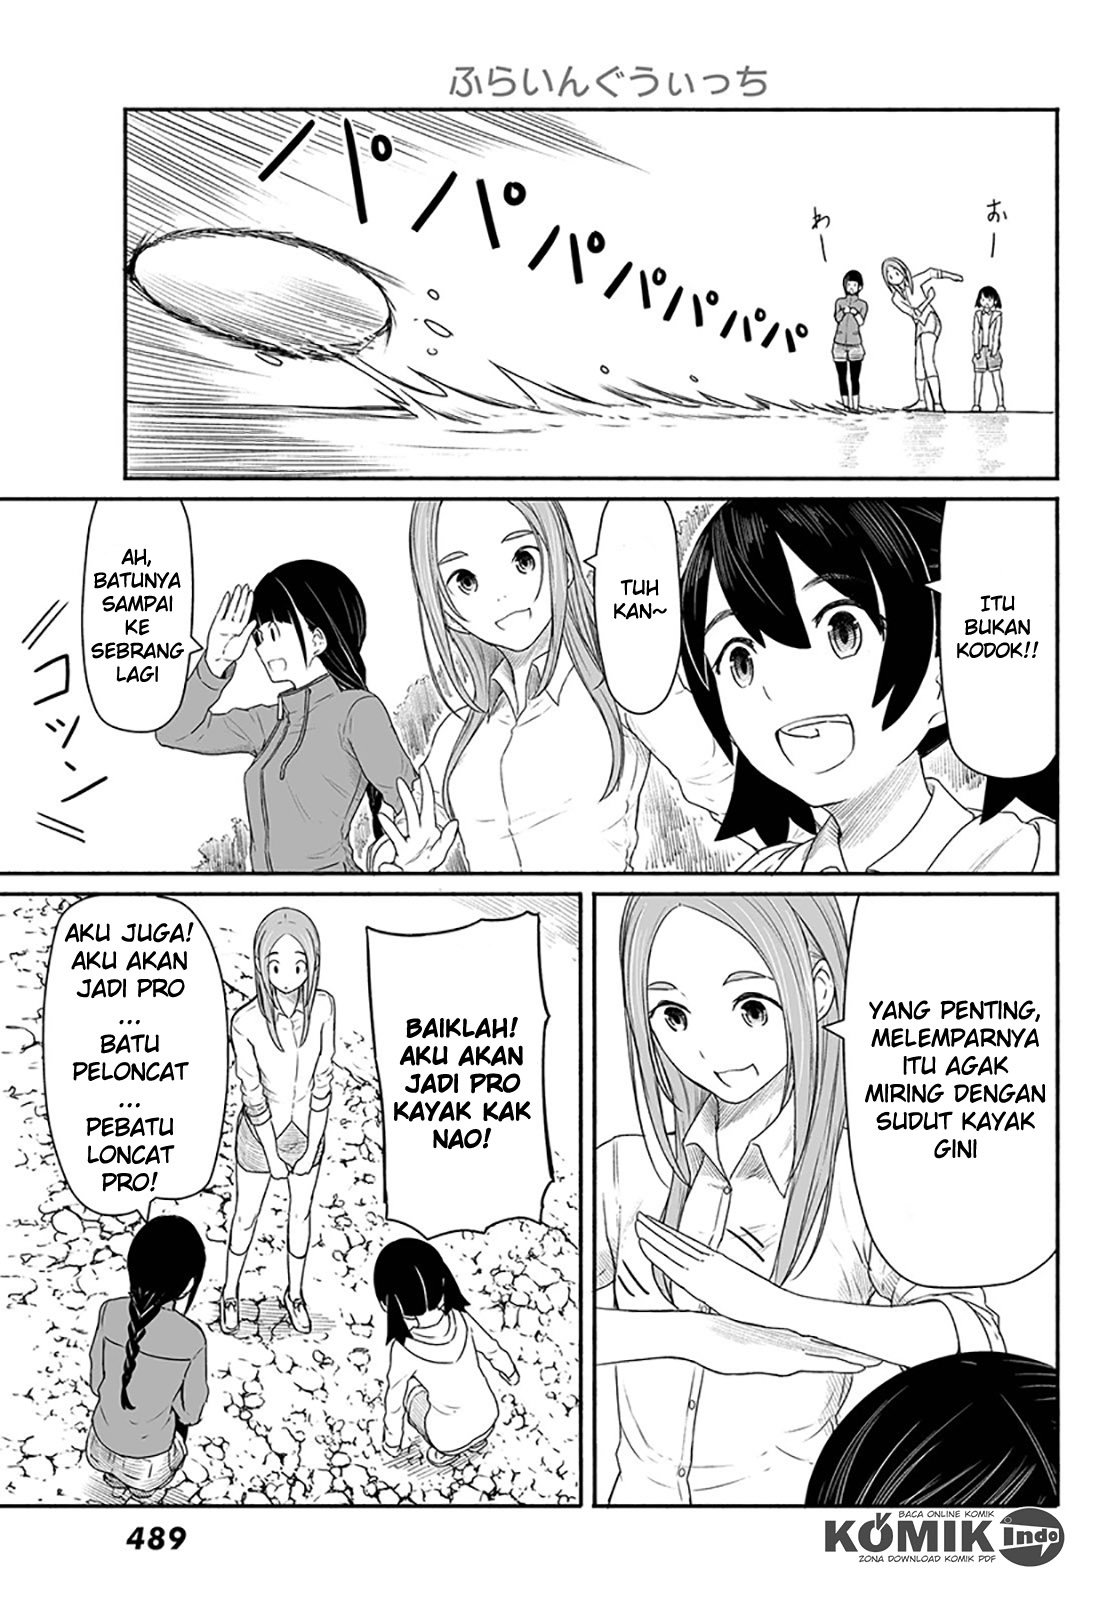 Flying Witch Chapter 27